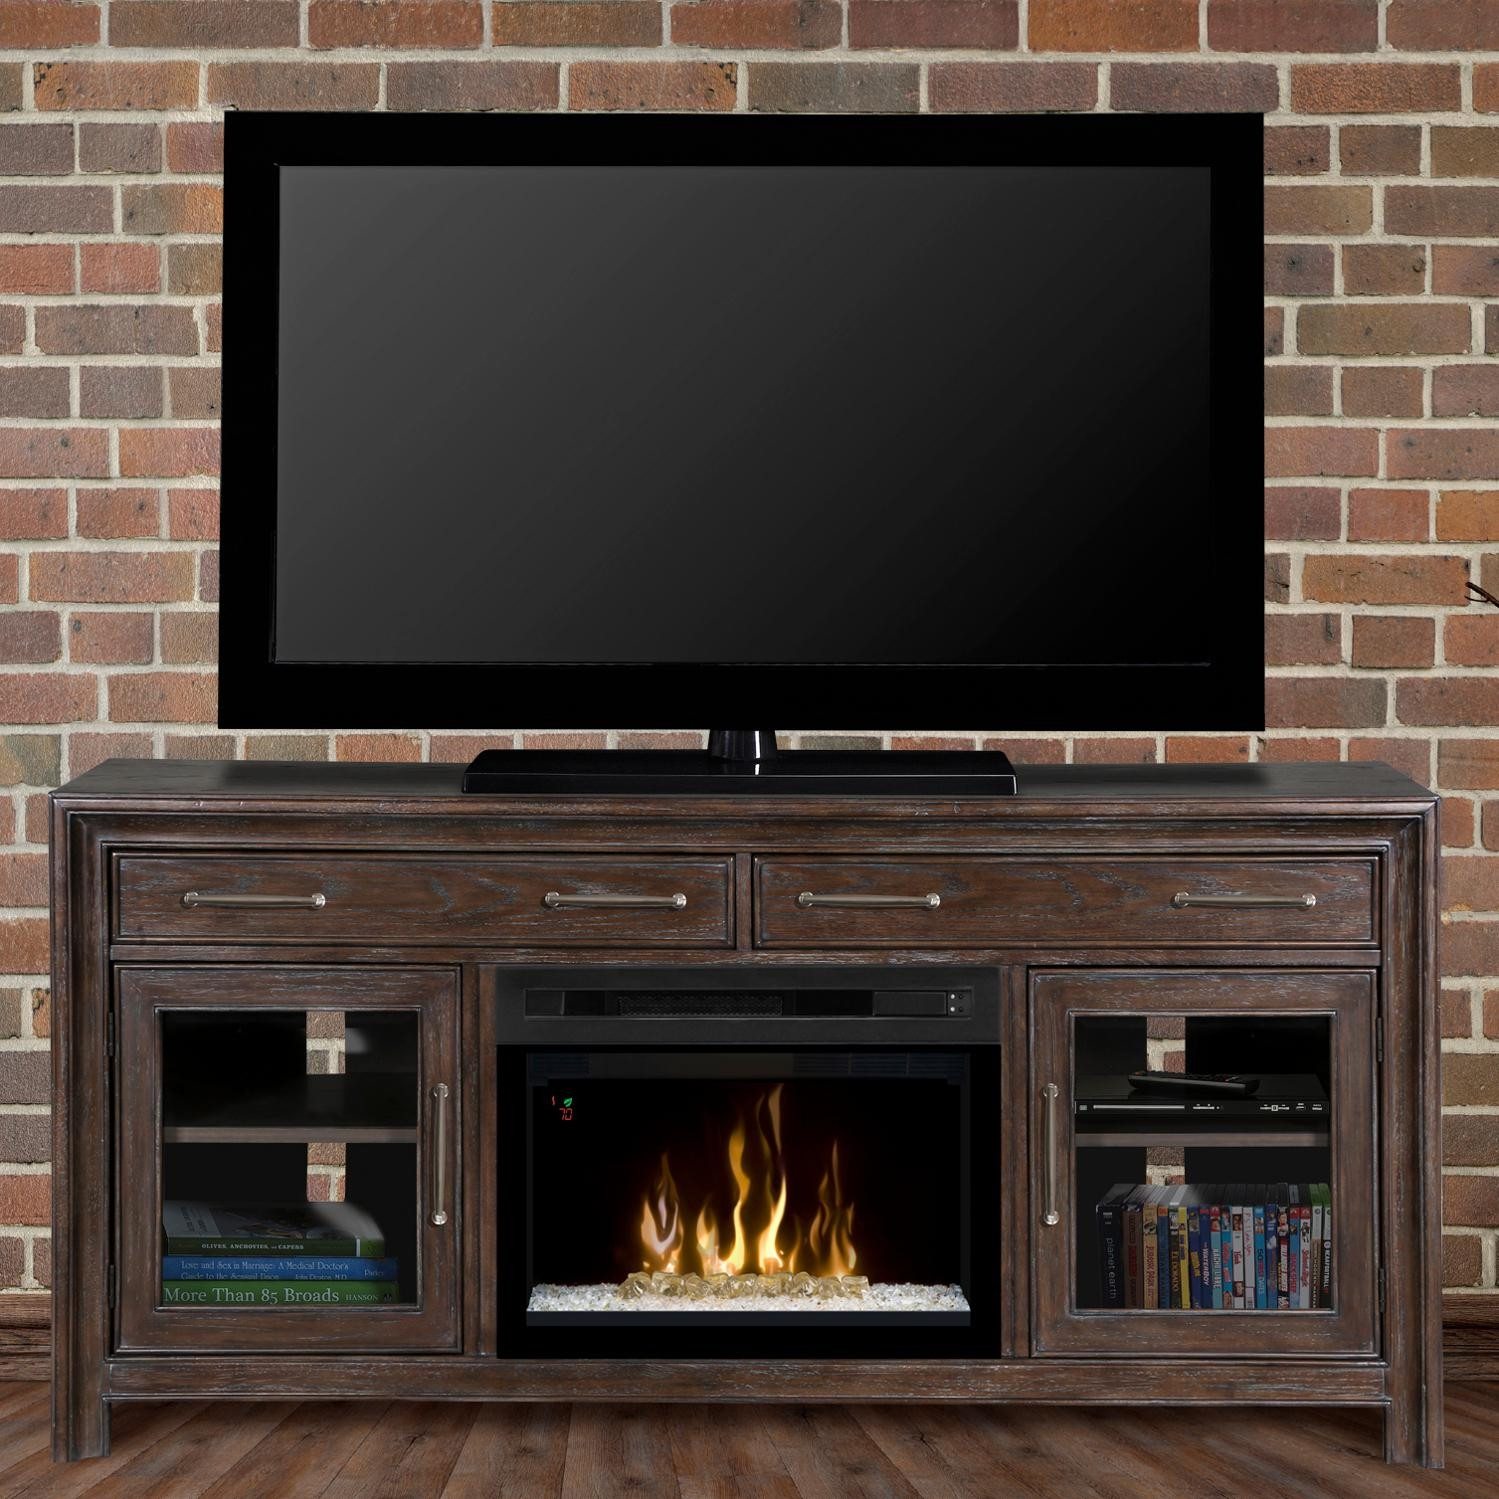 Ember Hearth Electric Media Fireplace
 Beautiful Ember Hearth Electric Media Fireplace